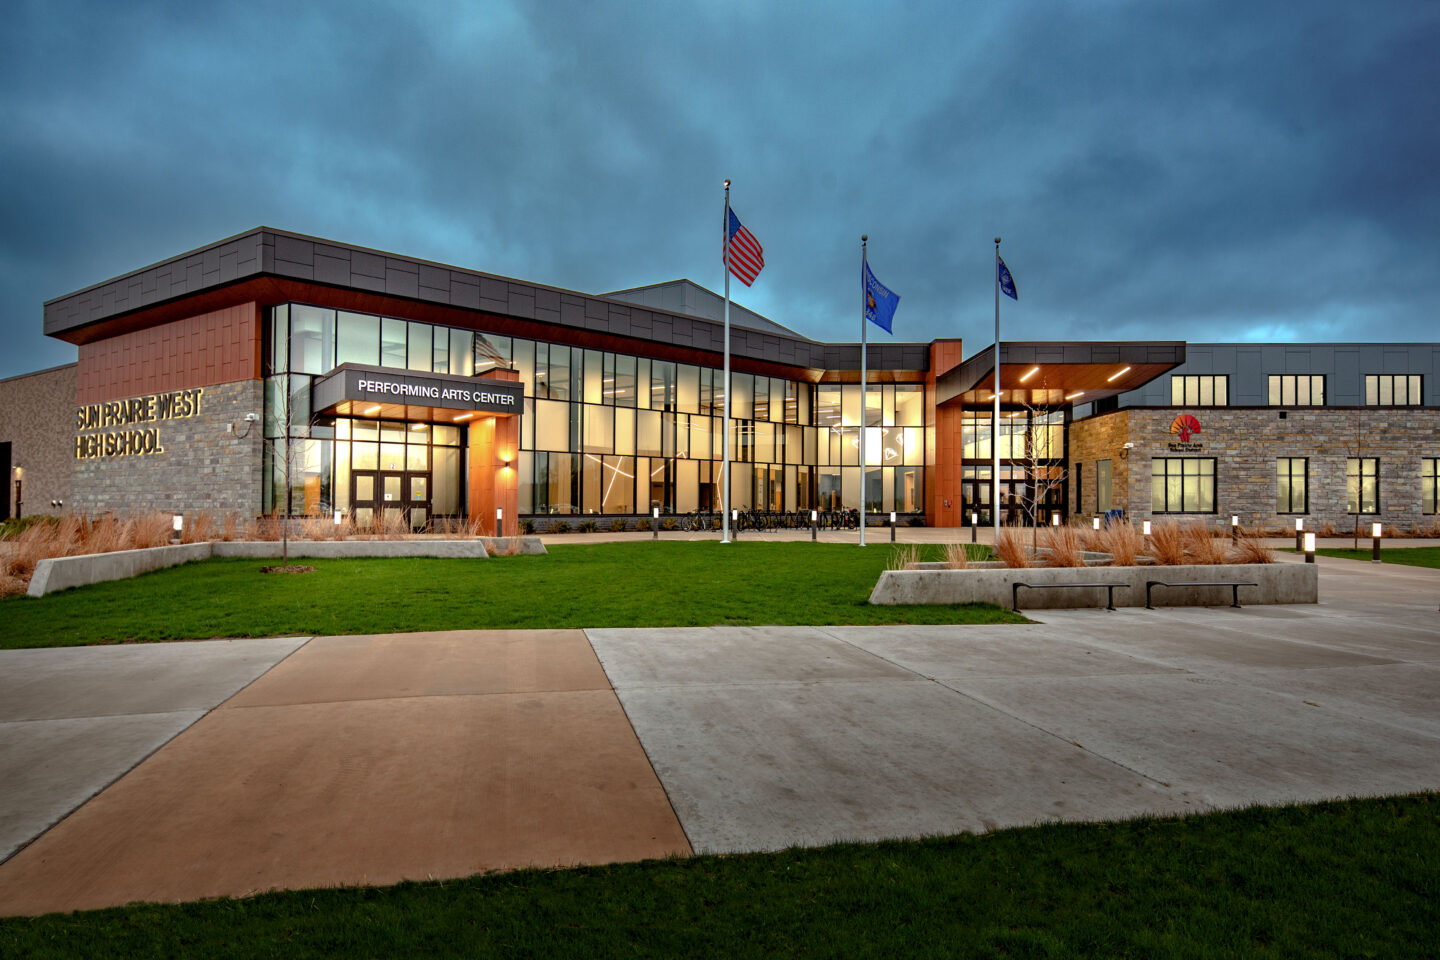 Night view of the main entrance